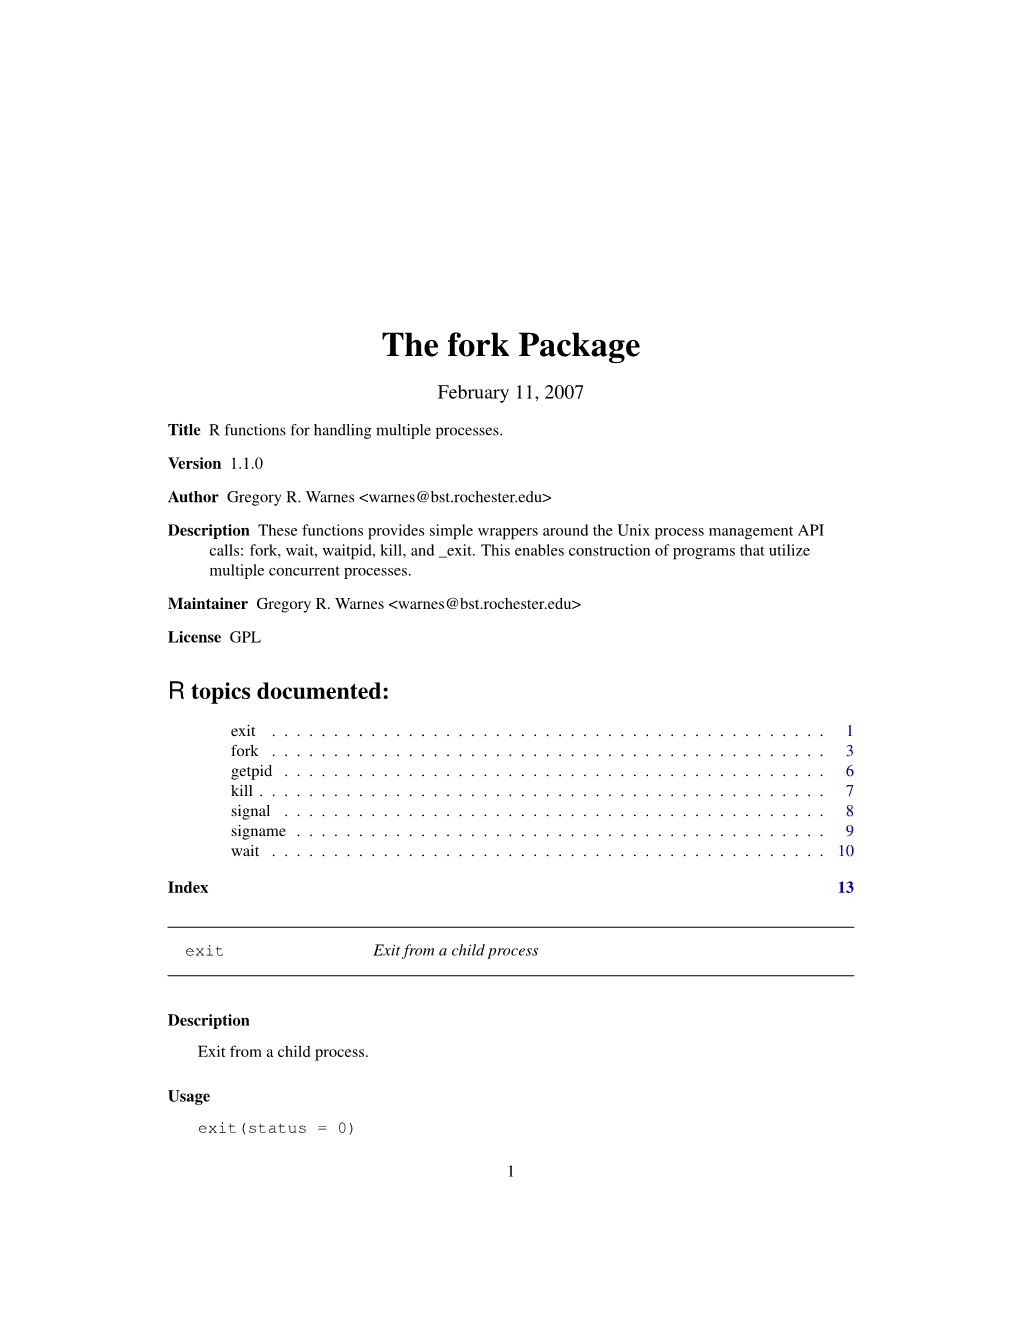 The Fork Package February 11, 2007